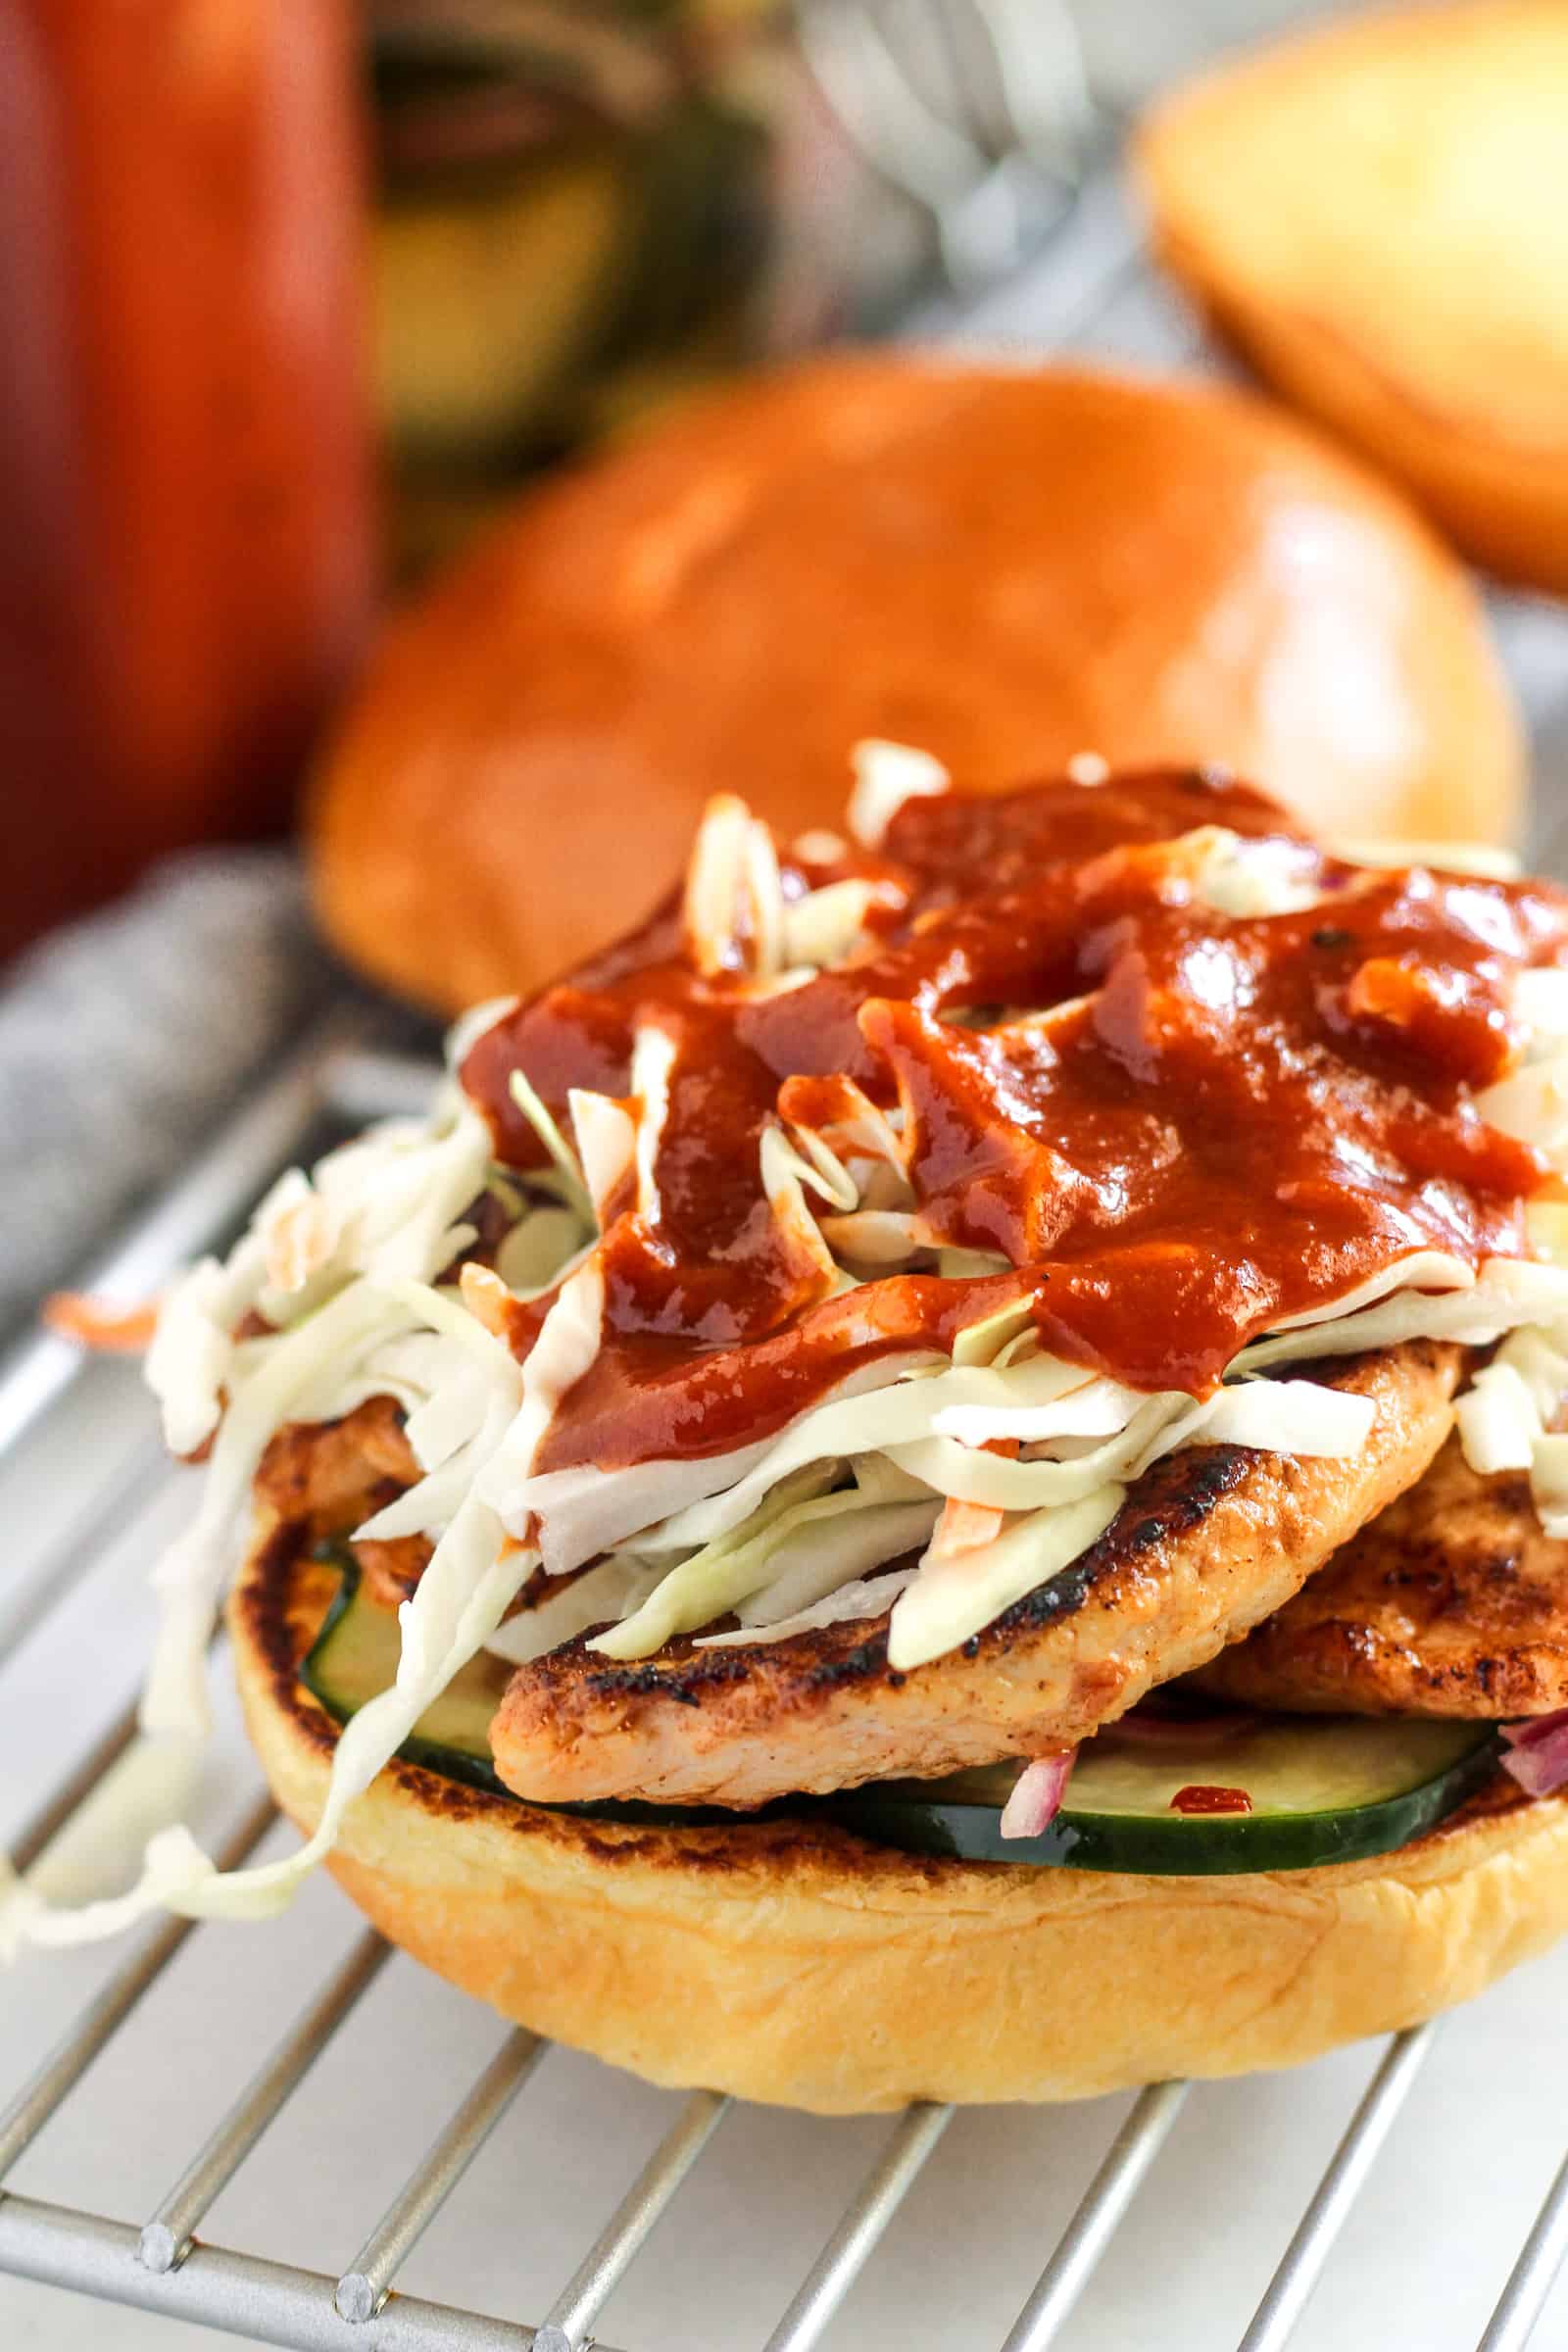 This fast pork recipe for Gochujang Pork Sandwiches is spicy, hearty, and easy. Enjoy this easy pork recipe using Smithfield Prime Fresh Pork | Street Smart Nutrition